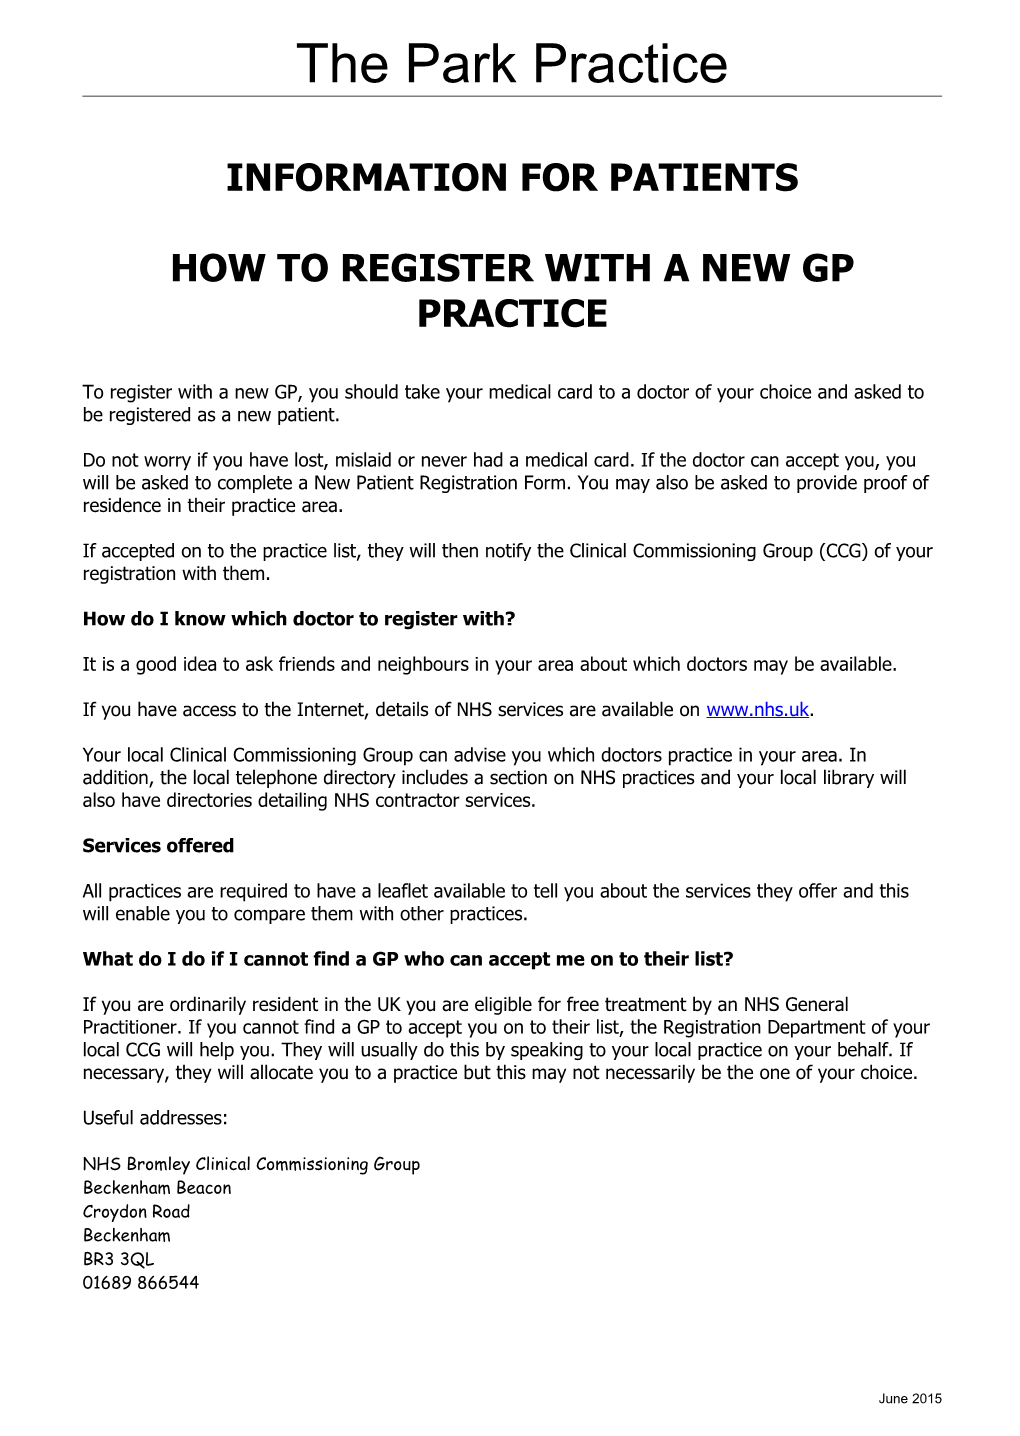 How to Register with a New Gp Practice